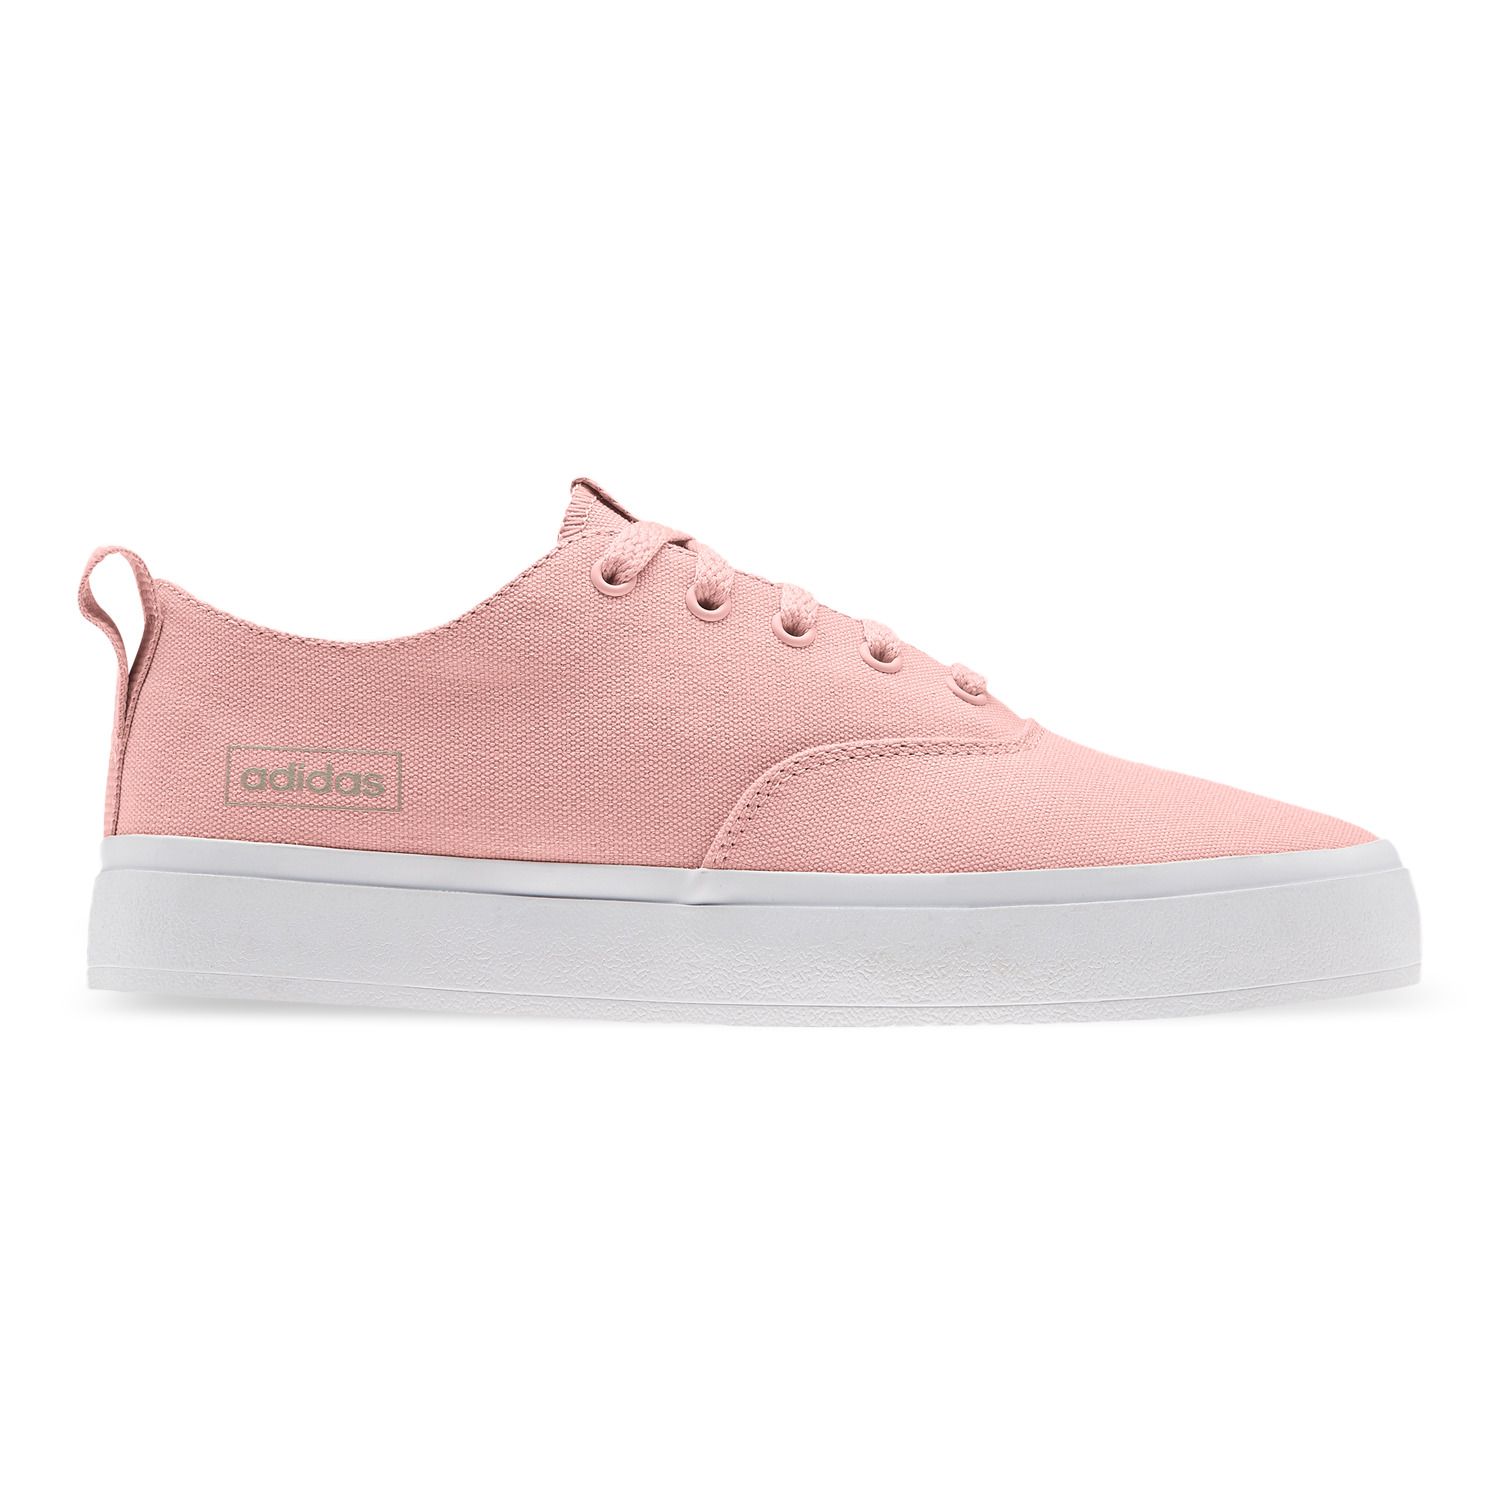 Womens Adidas Canvas Shoes | Kohl's